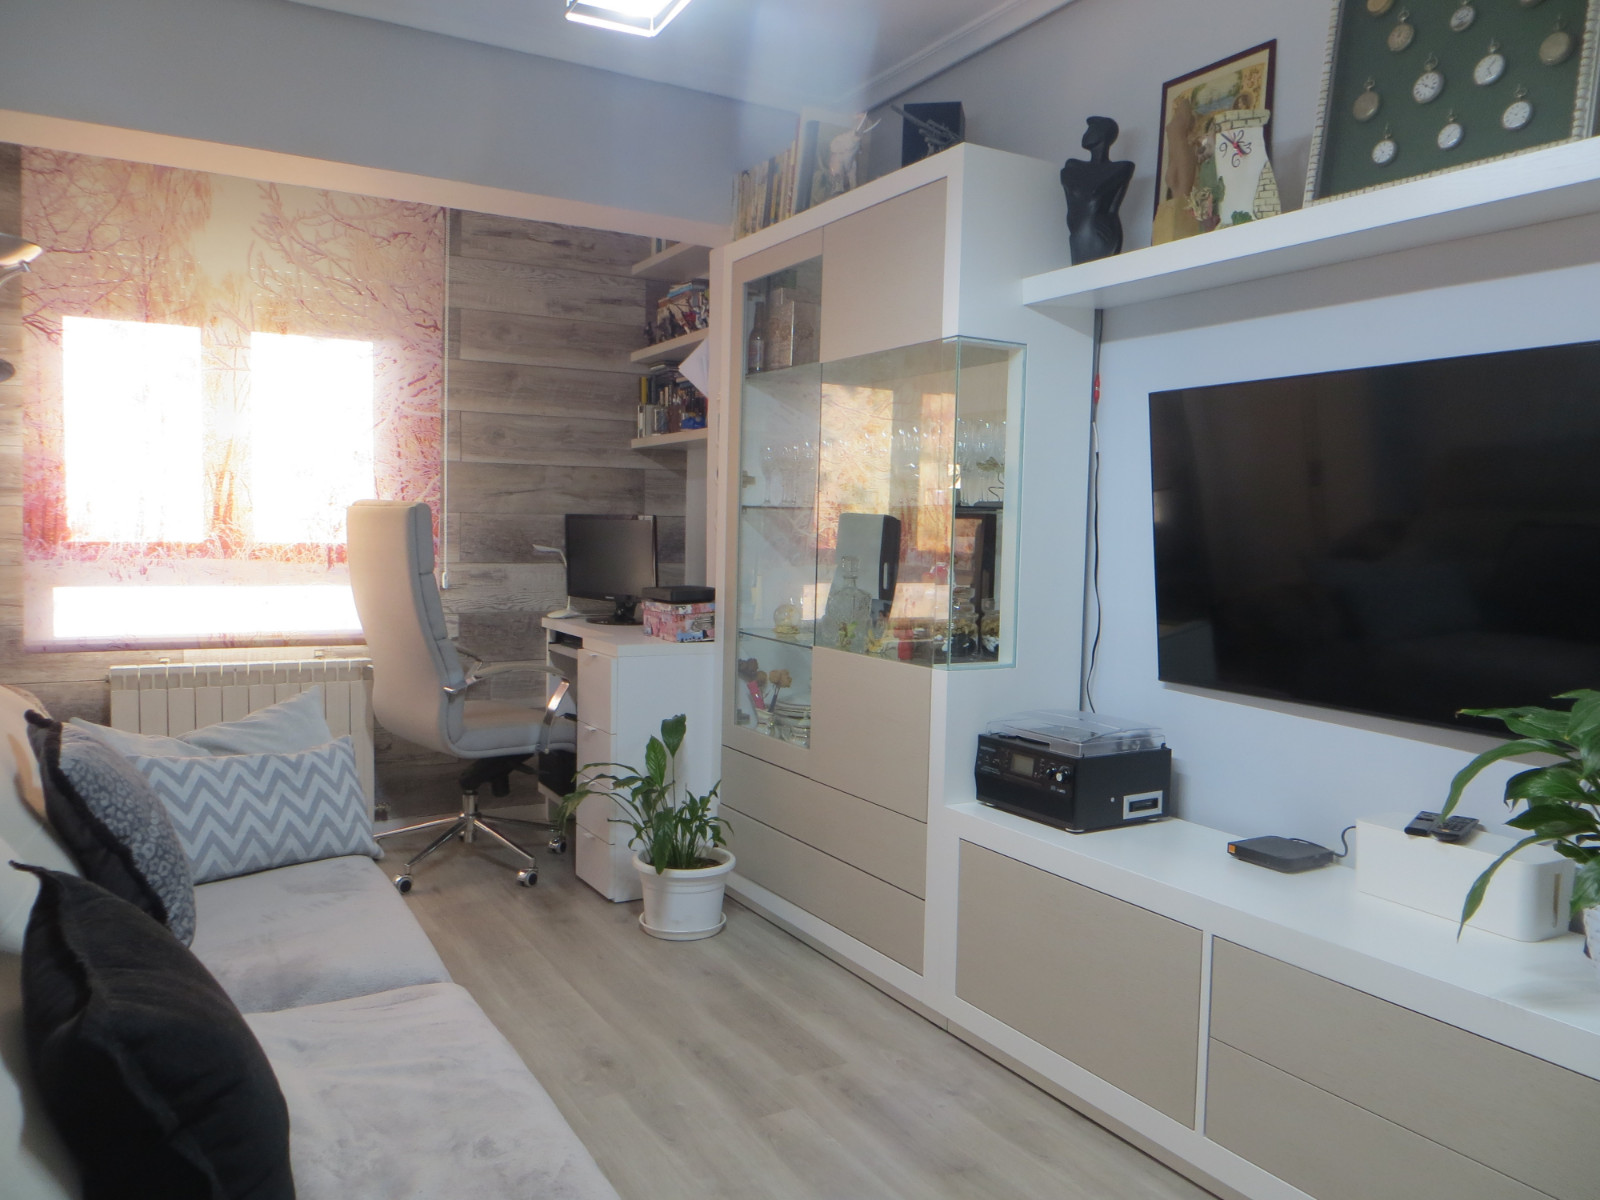 Flat for sale in Pajarillos, Valladolid